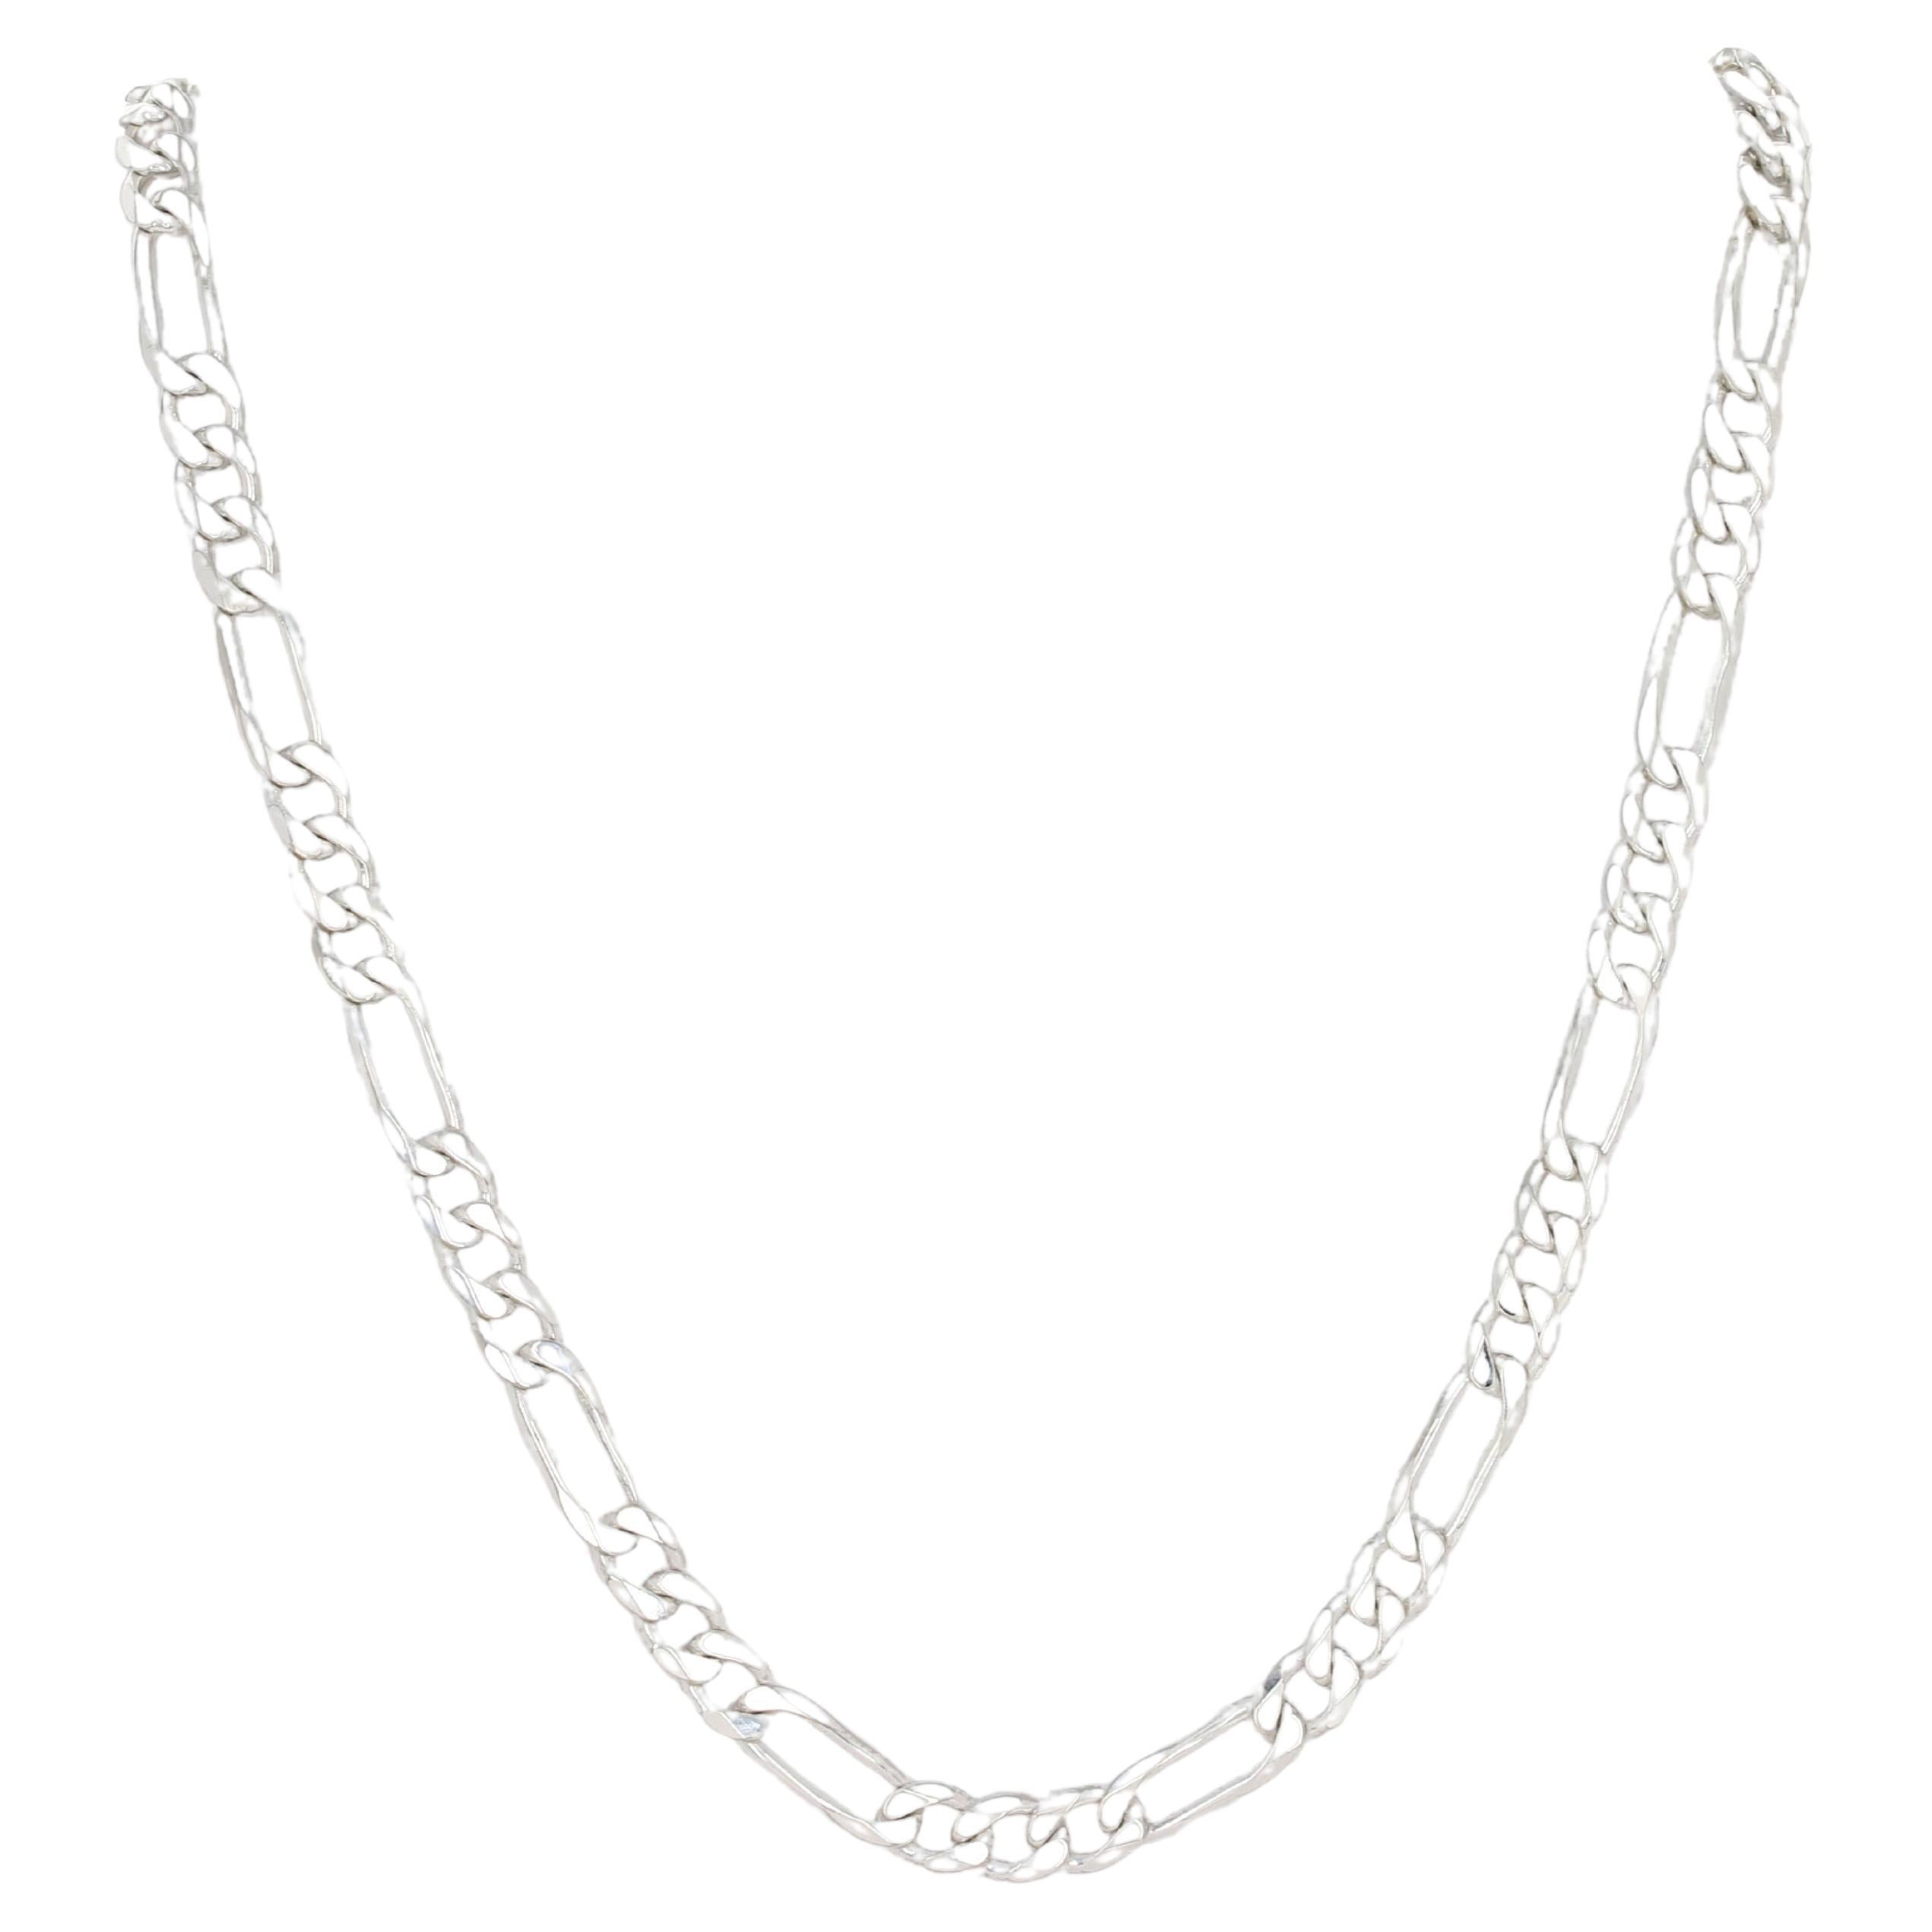 Sterling Silver Figaro Chain Men's Necklace 27 3/4" - 925 Italy For Sale